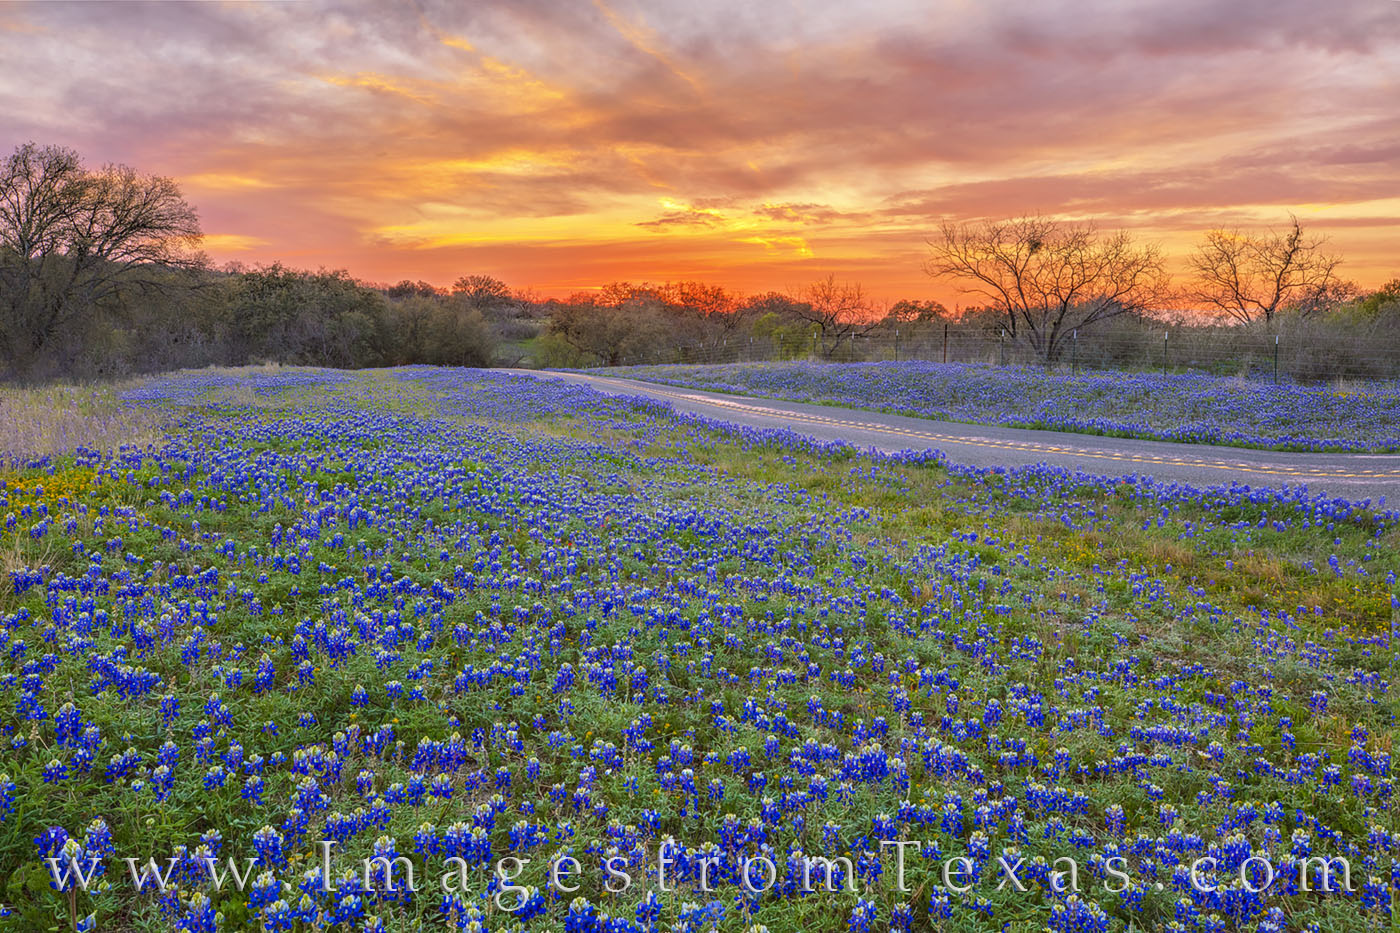 bluebonnets, hill country, llano, castel, FM 152, sunset, texas hill country, backroads, orange, peace, blue